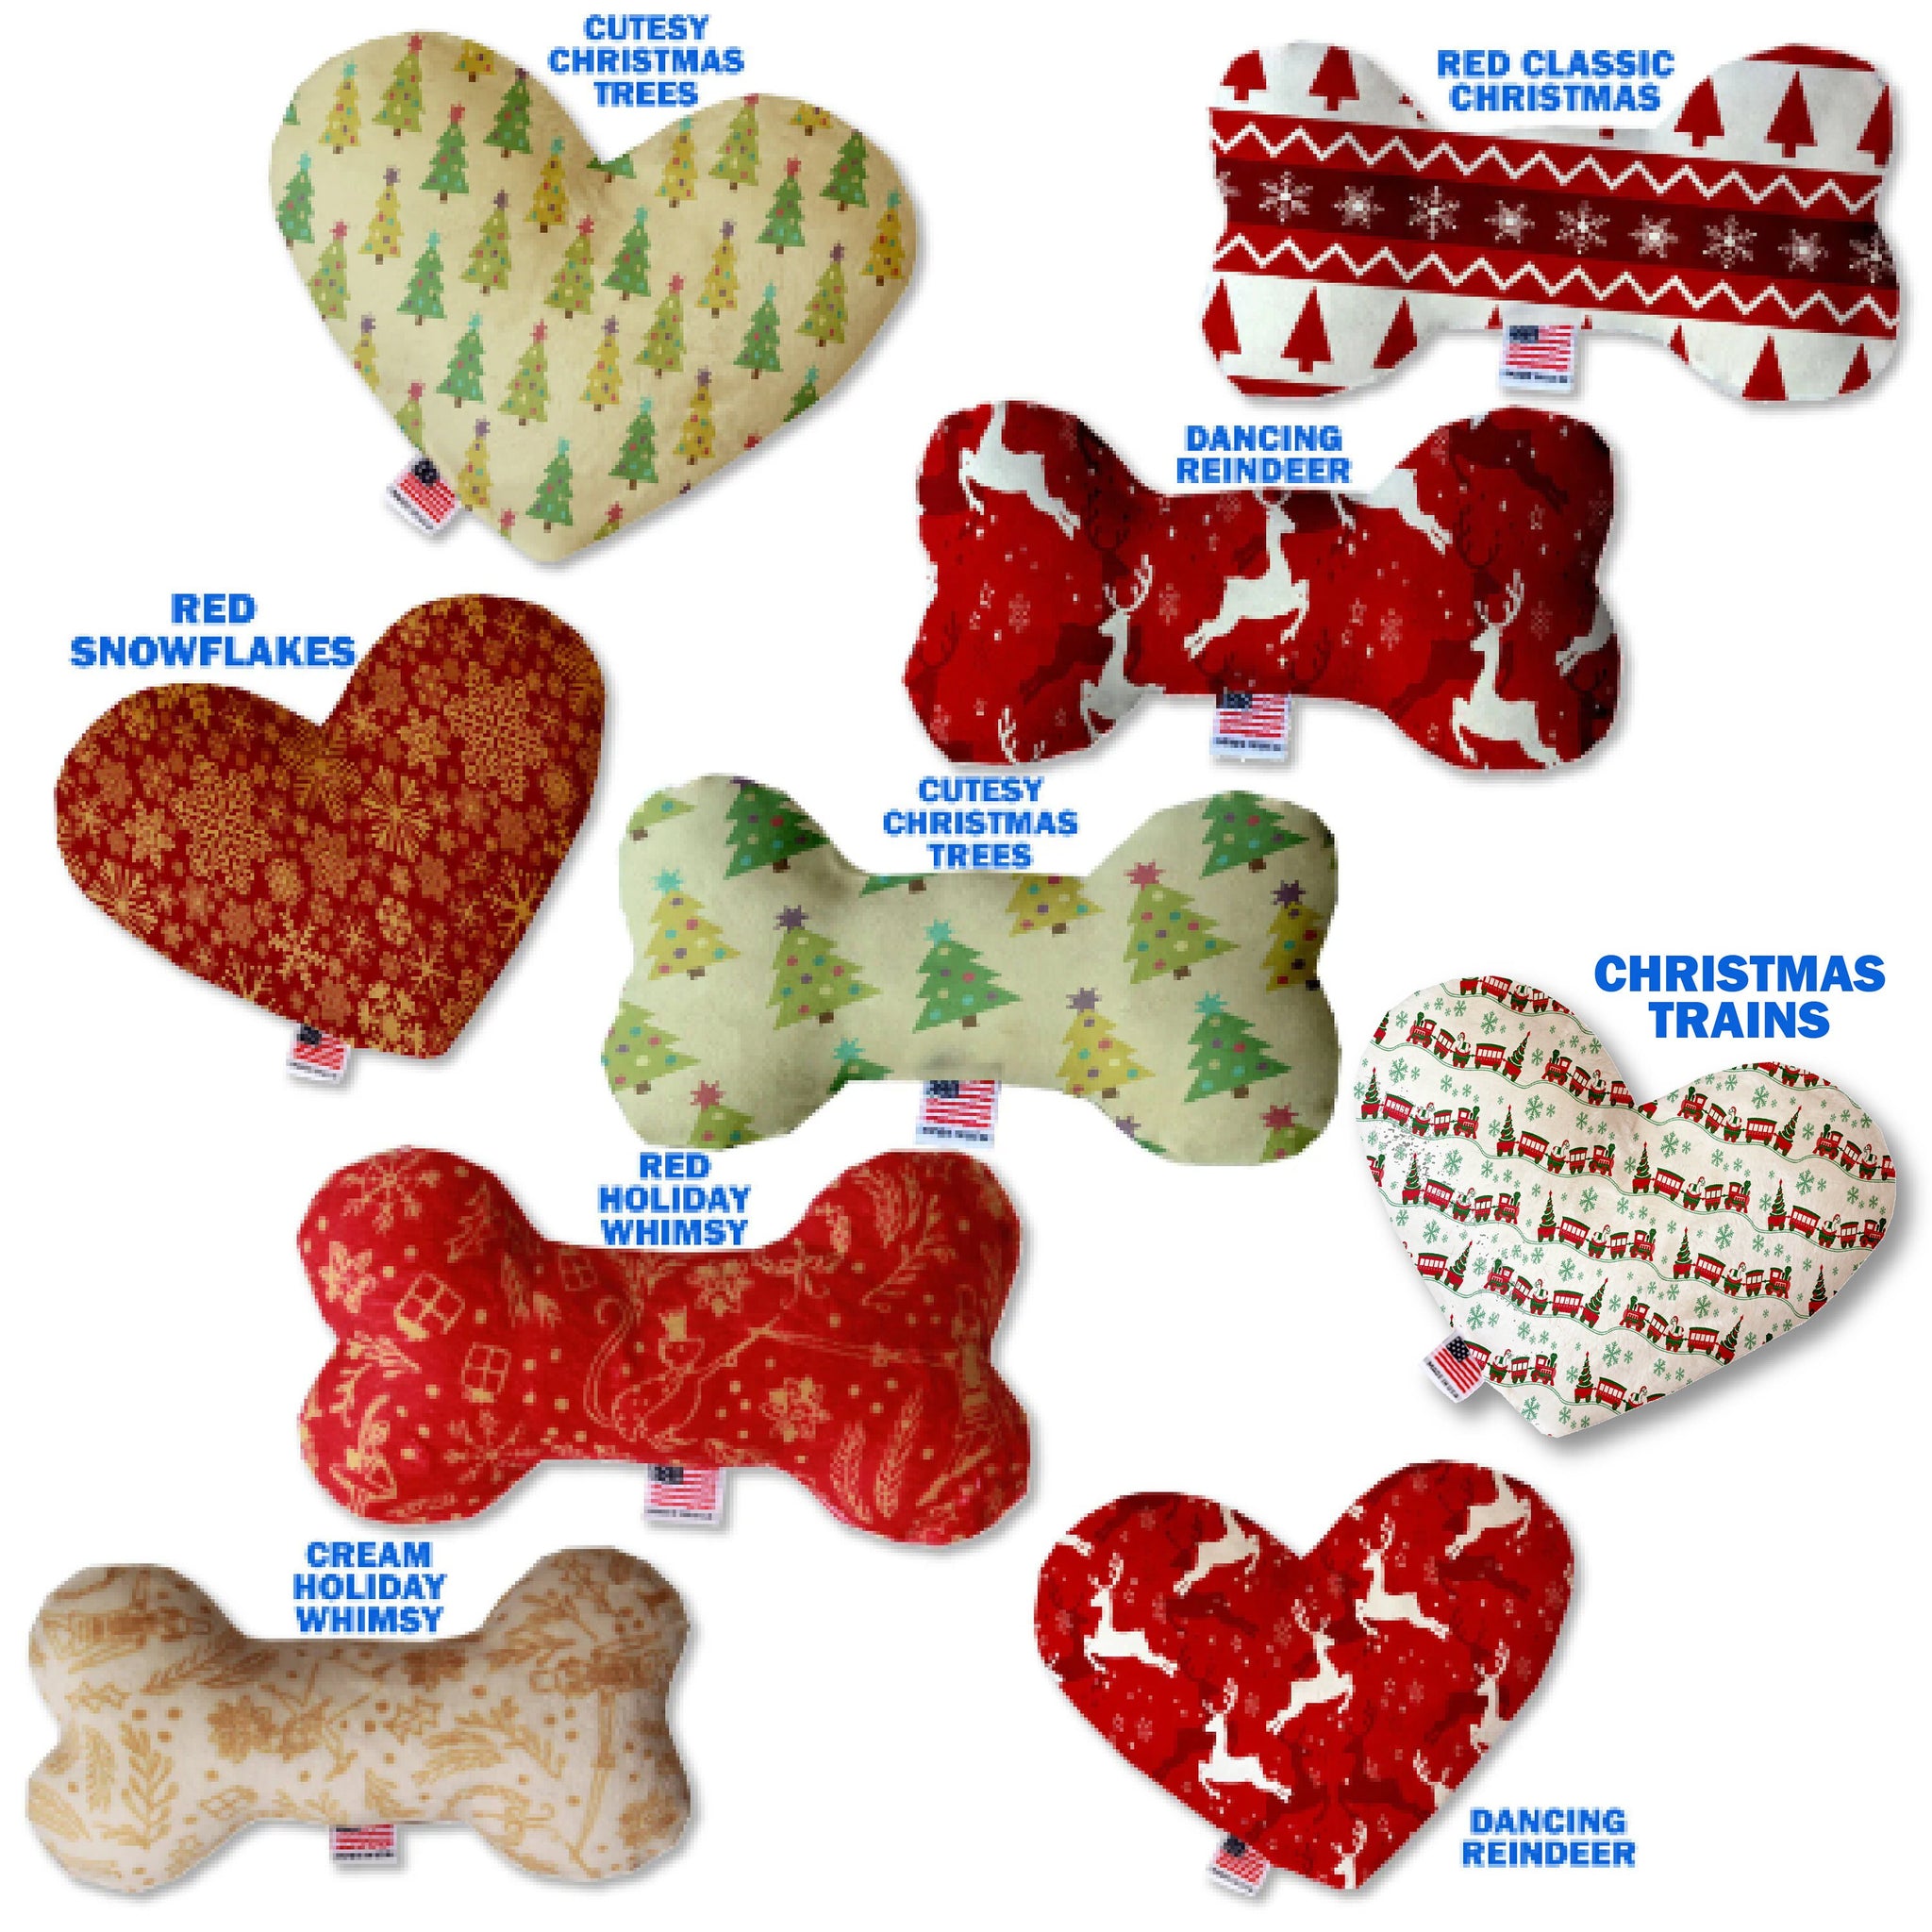 Pet and Dog Canvas or Plush Heart or Bone Toy, "Classy Christmas Group" (Available in different sizes, and 7 different pattern options!)